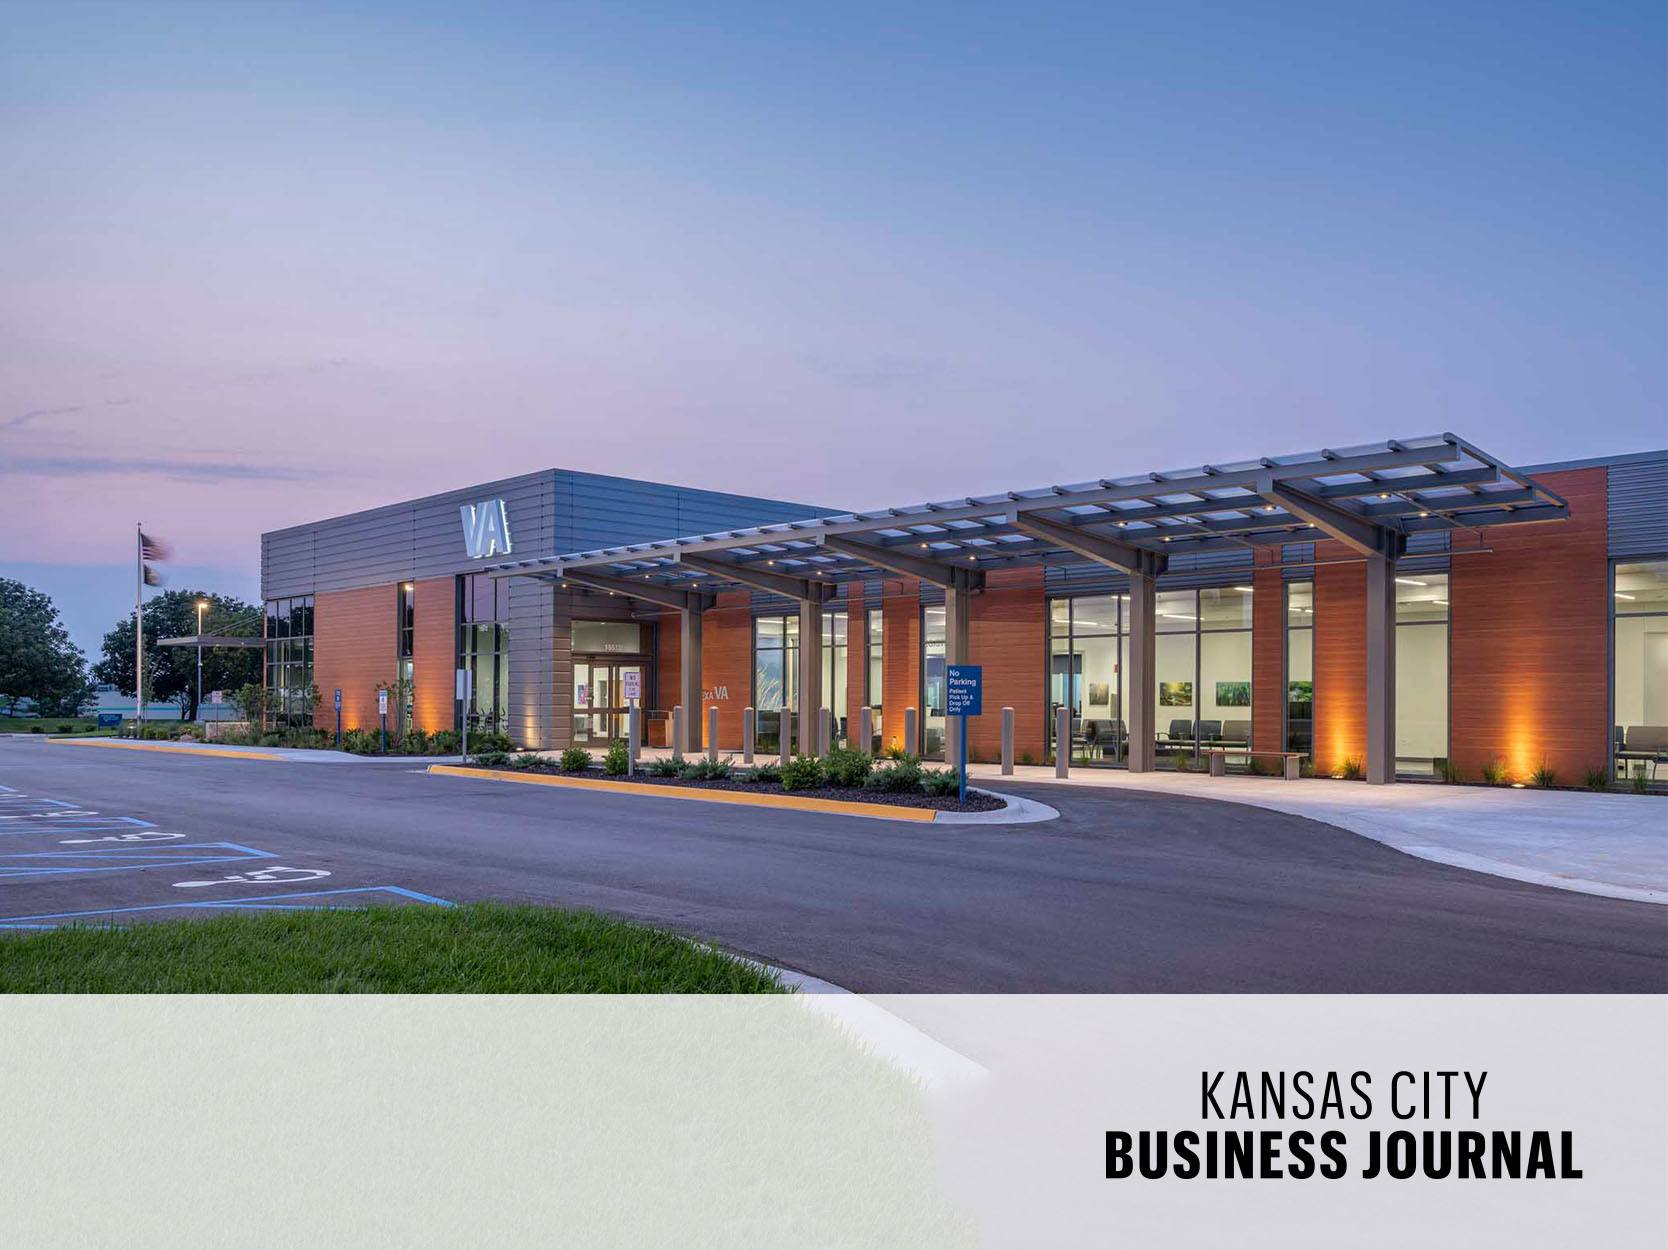 With 30 VA facilities under its belt, Leawood architecture firm focuses on sustainability